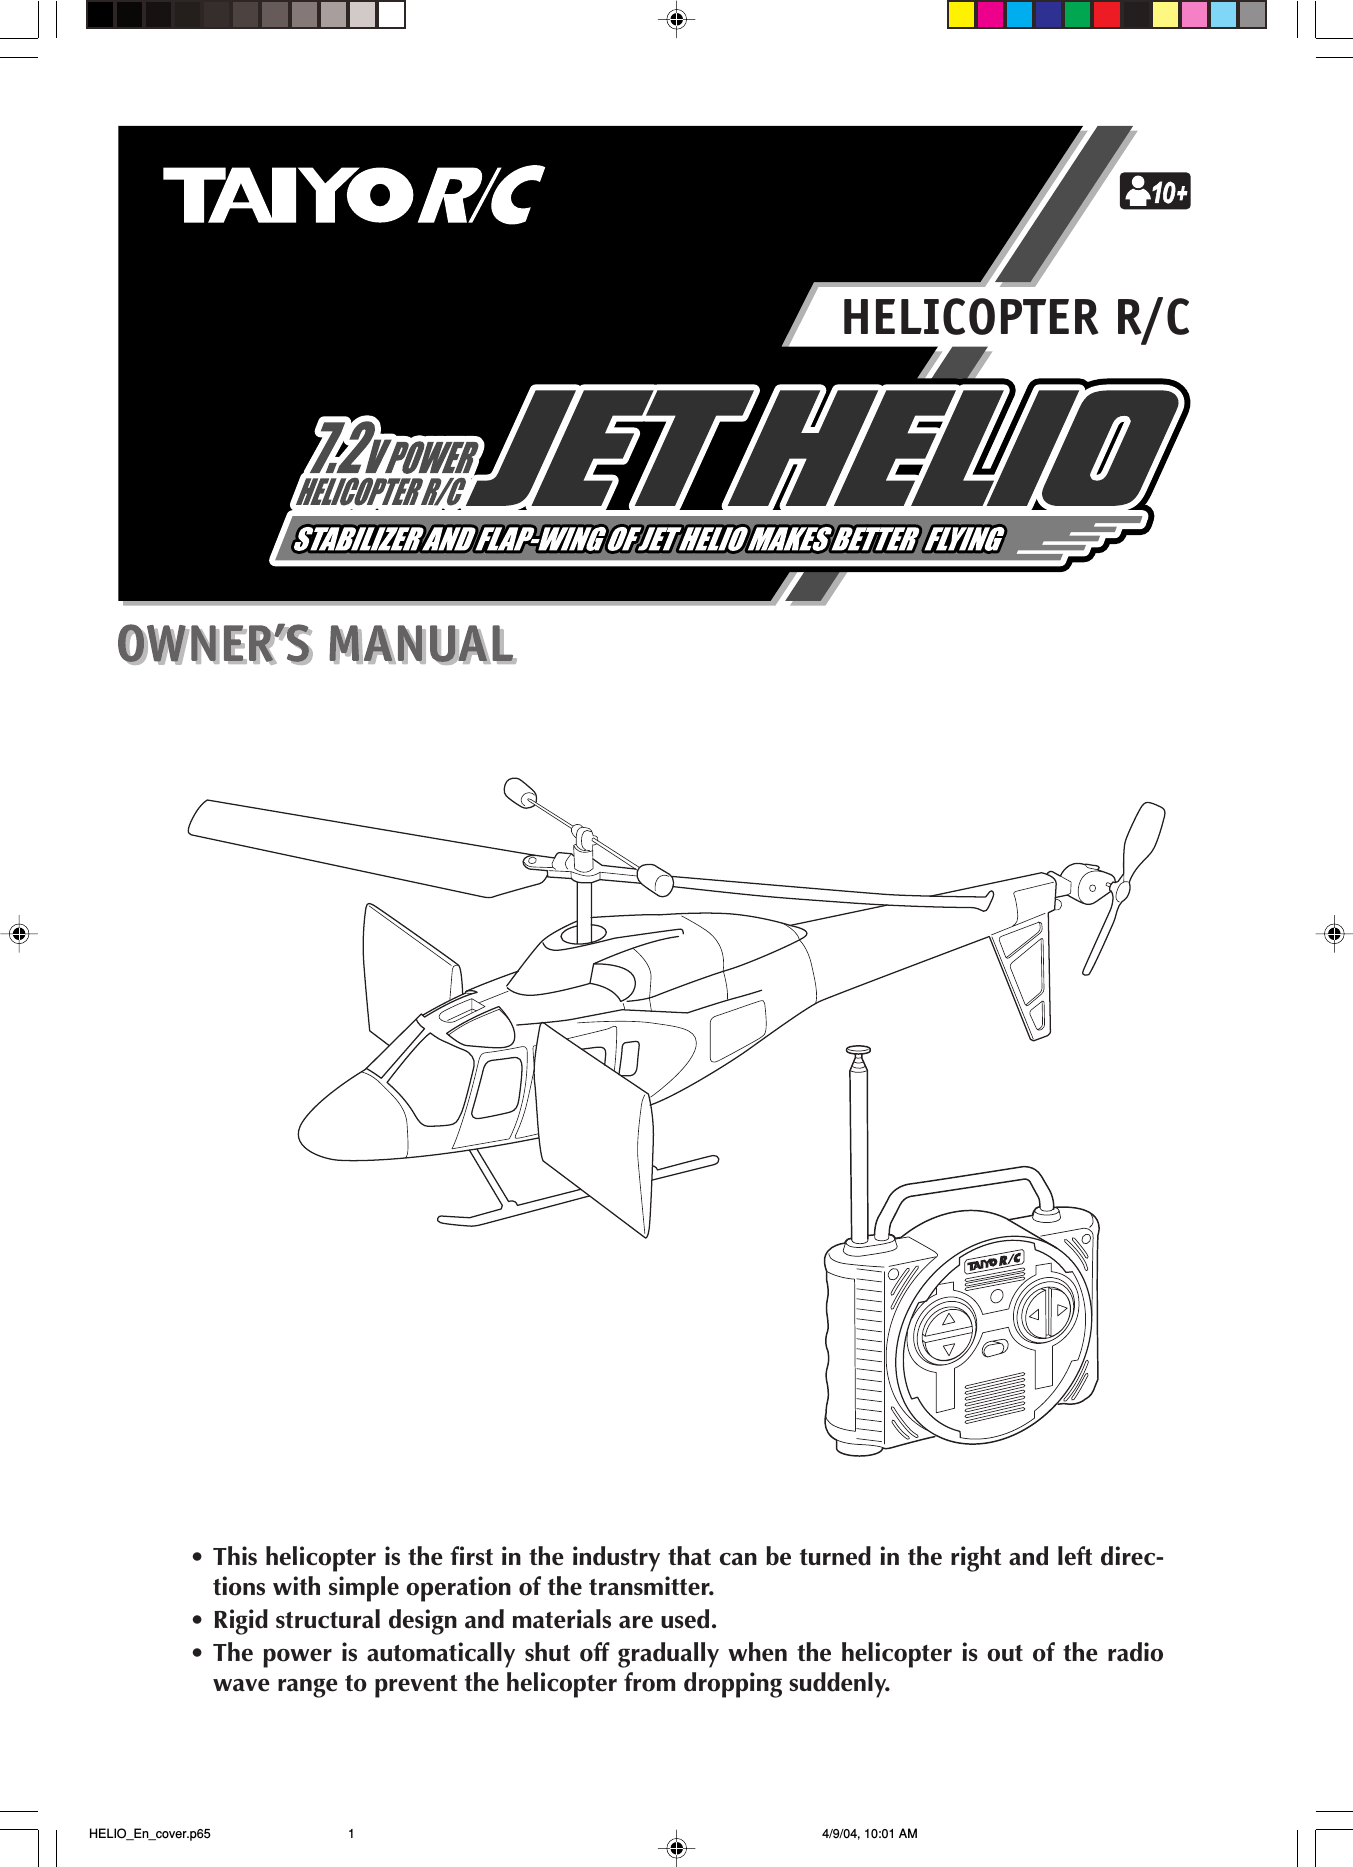 HELICOPTER R/C• This helicopter is the first in the industry that can be turned in the right and left direc-tions with simple operation of the transmitter.• Rigid structural design and materials are used.• The power is automatically shut off gradually when the helicopter is out of the radiowave range to prevent the helicopter from dropping suddenly. HELIO_En_cover.p65 4/9/04, 10:01 AM1